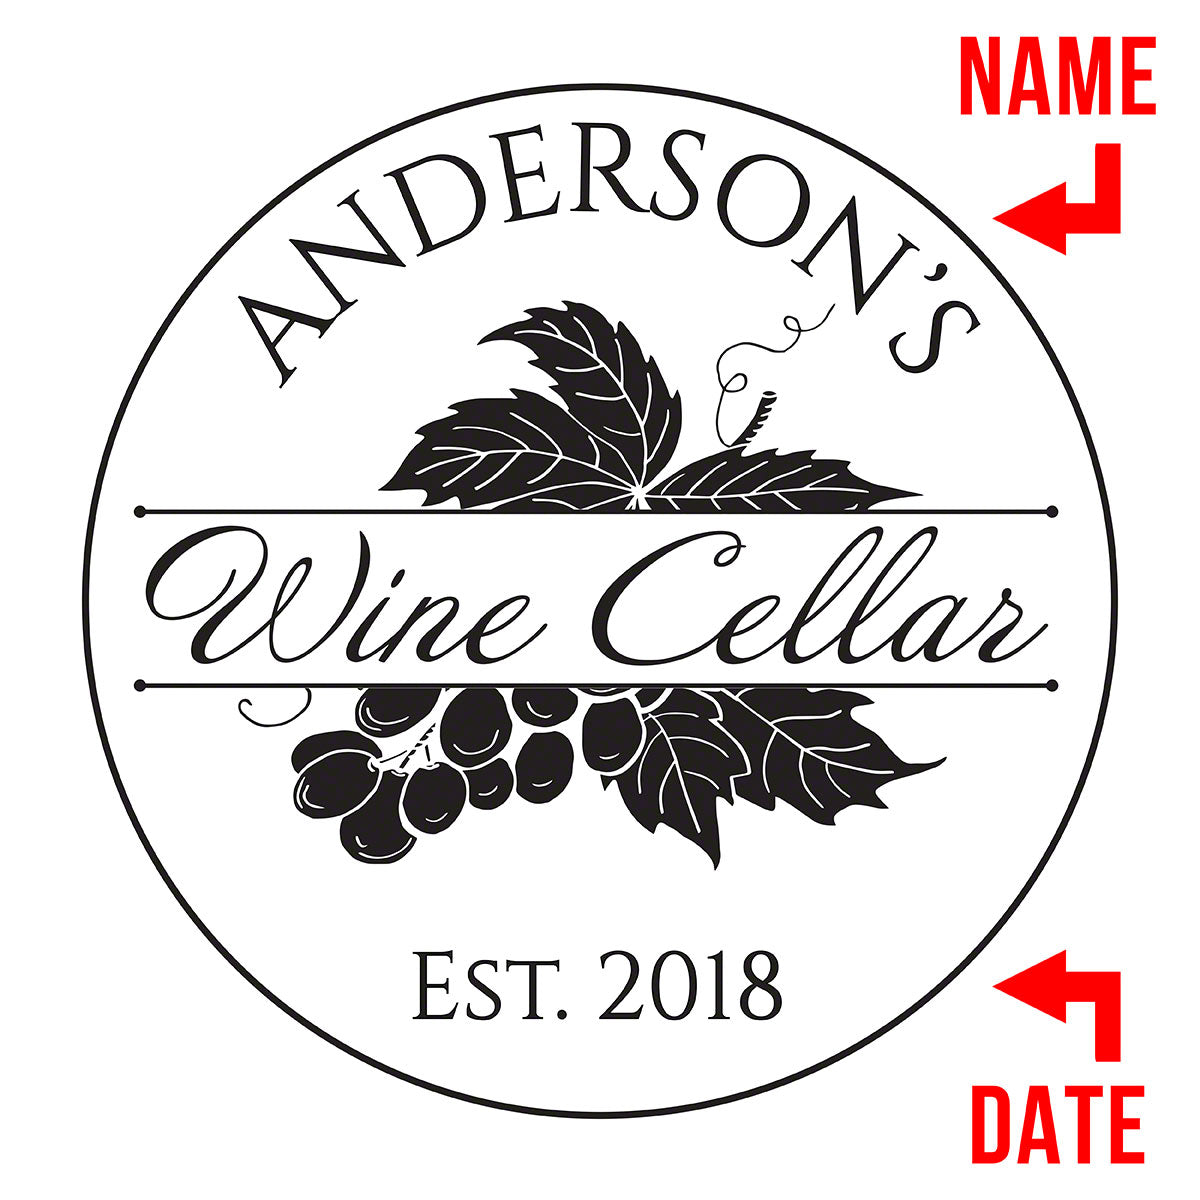 Rhone Valley Personalized Wine Cellar Sign (Signature Series)